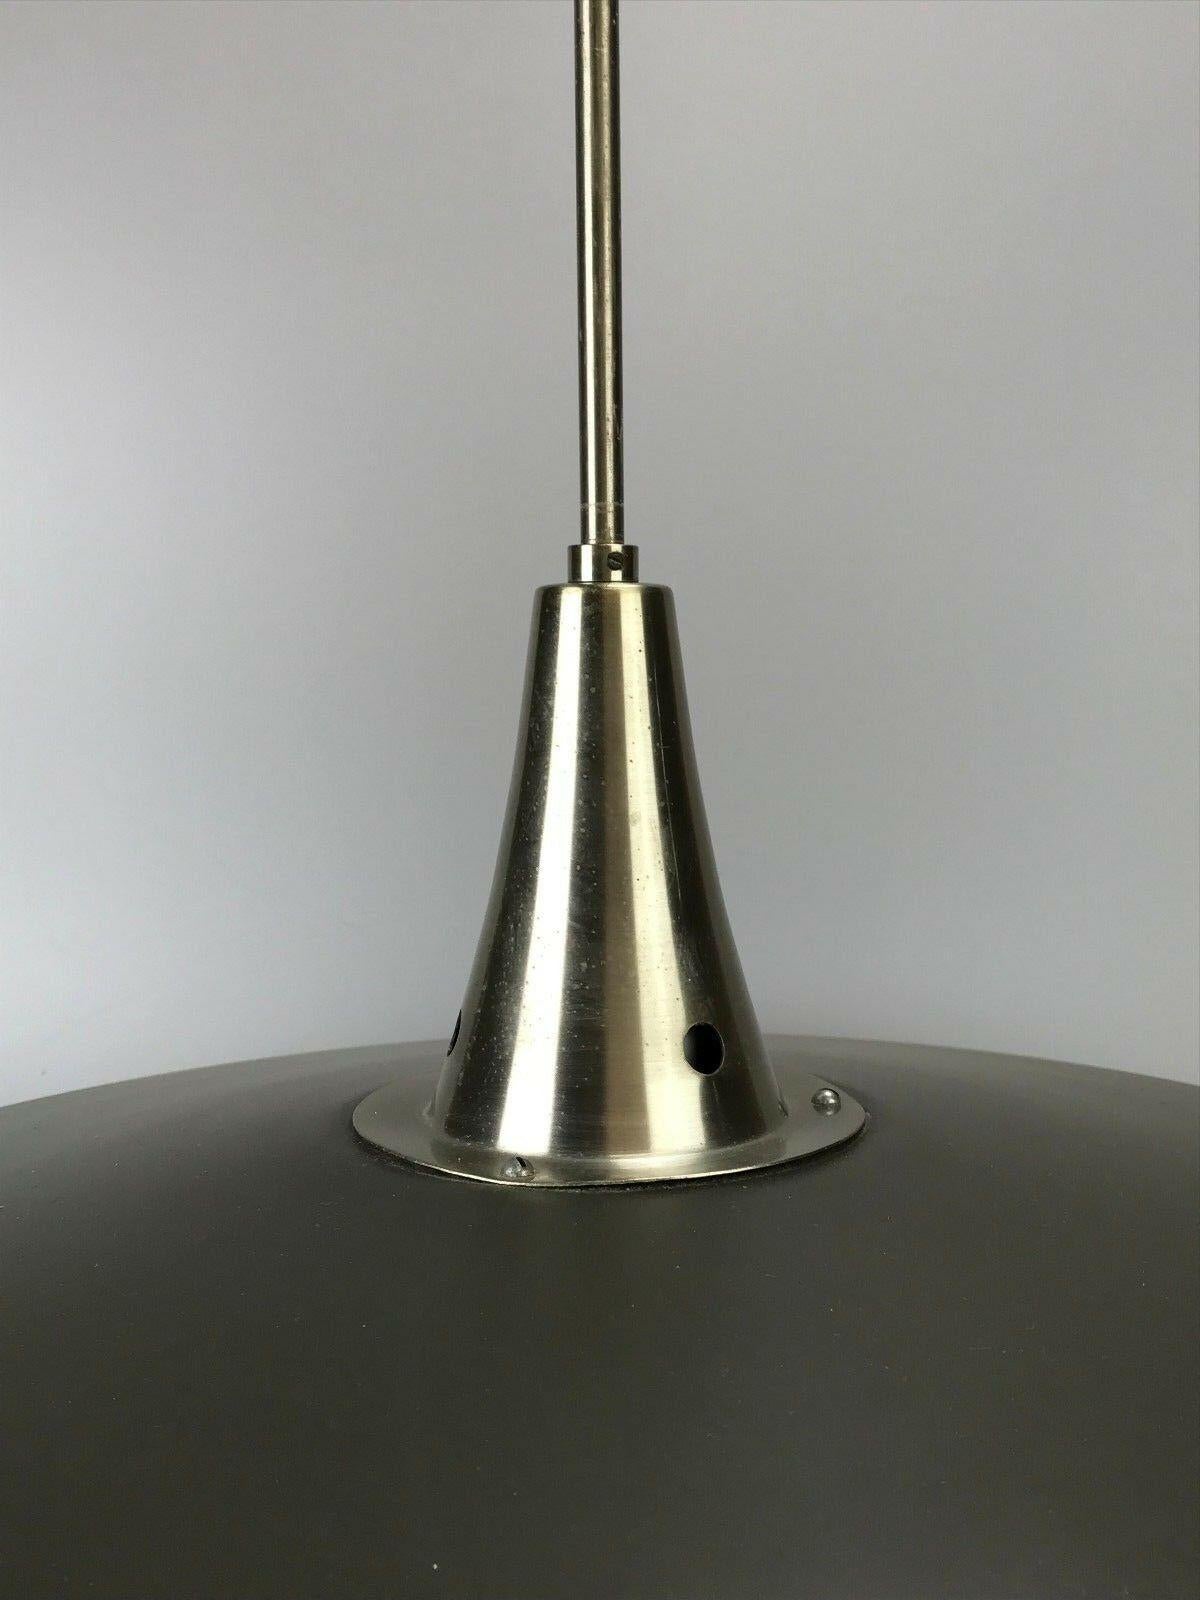 70s Lamp Light Ceiling Lamp Metal Hanging Lamp Space Age Design In Good Condition For Sale In Neuenkirchen, NI